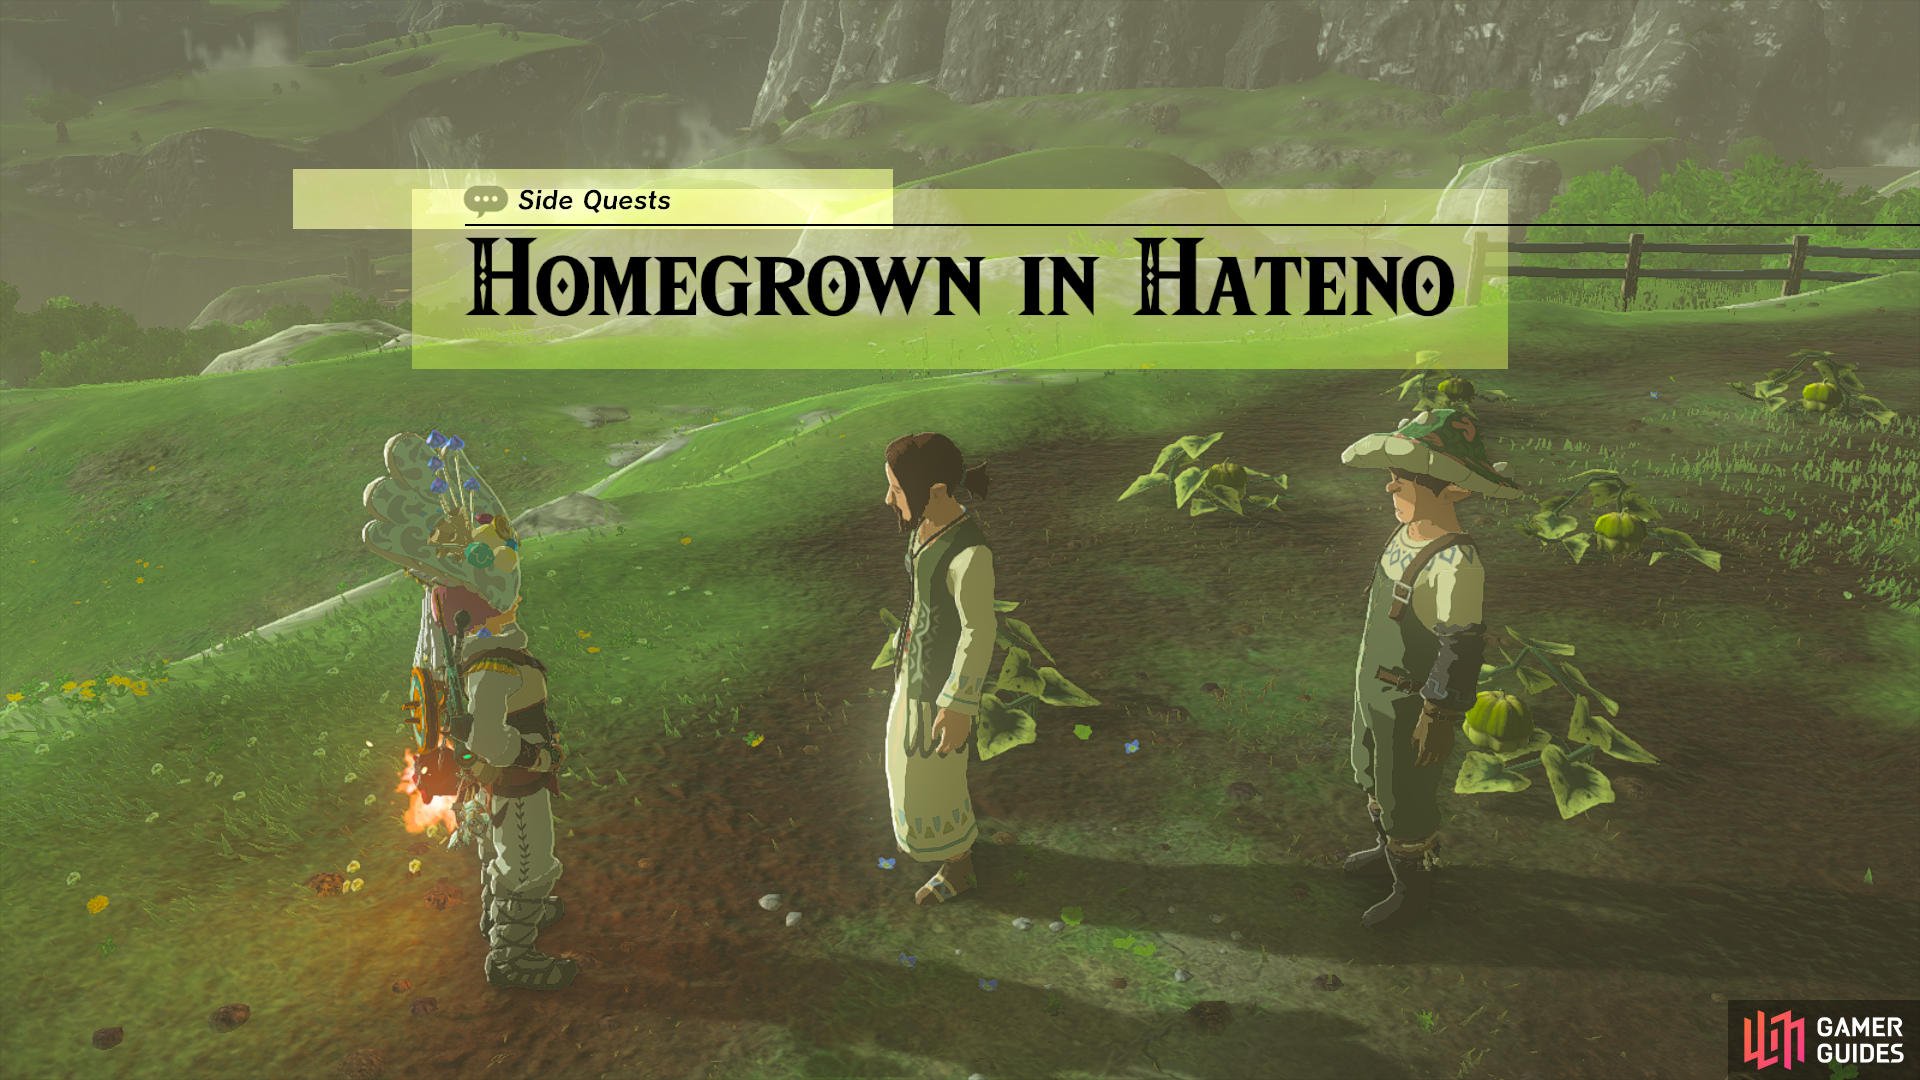 Starting the Homegrown in Hateno side quest.